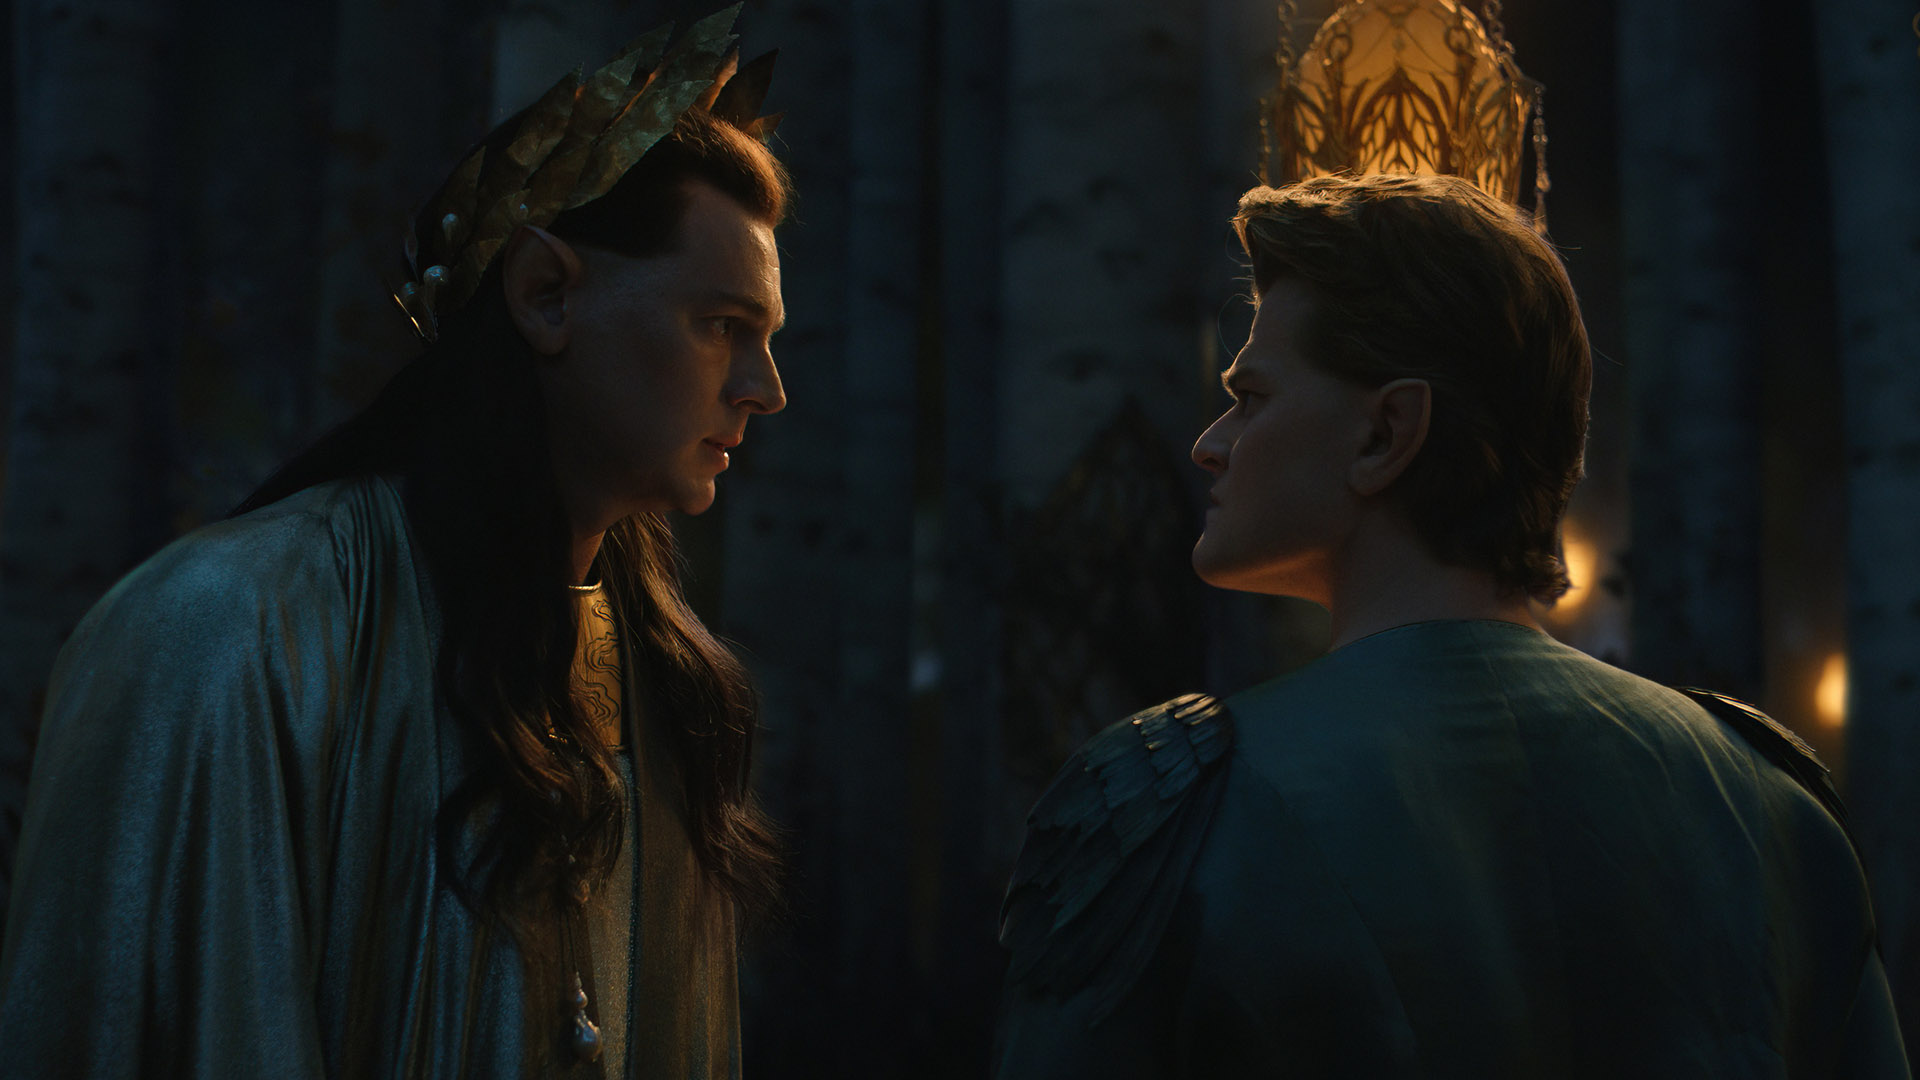 Gil-galad speaks to Elrond at night in Lindon in The Rings of Power episode 5